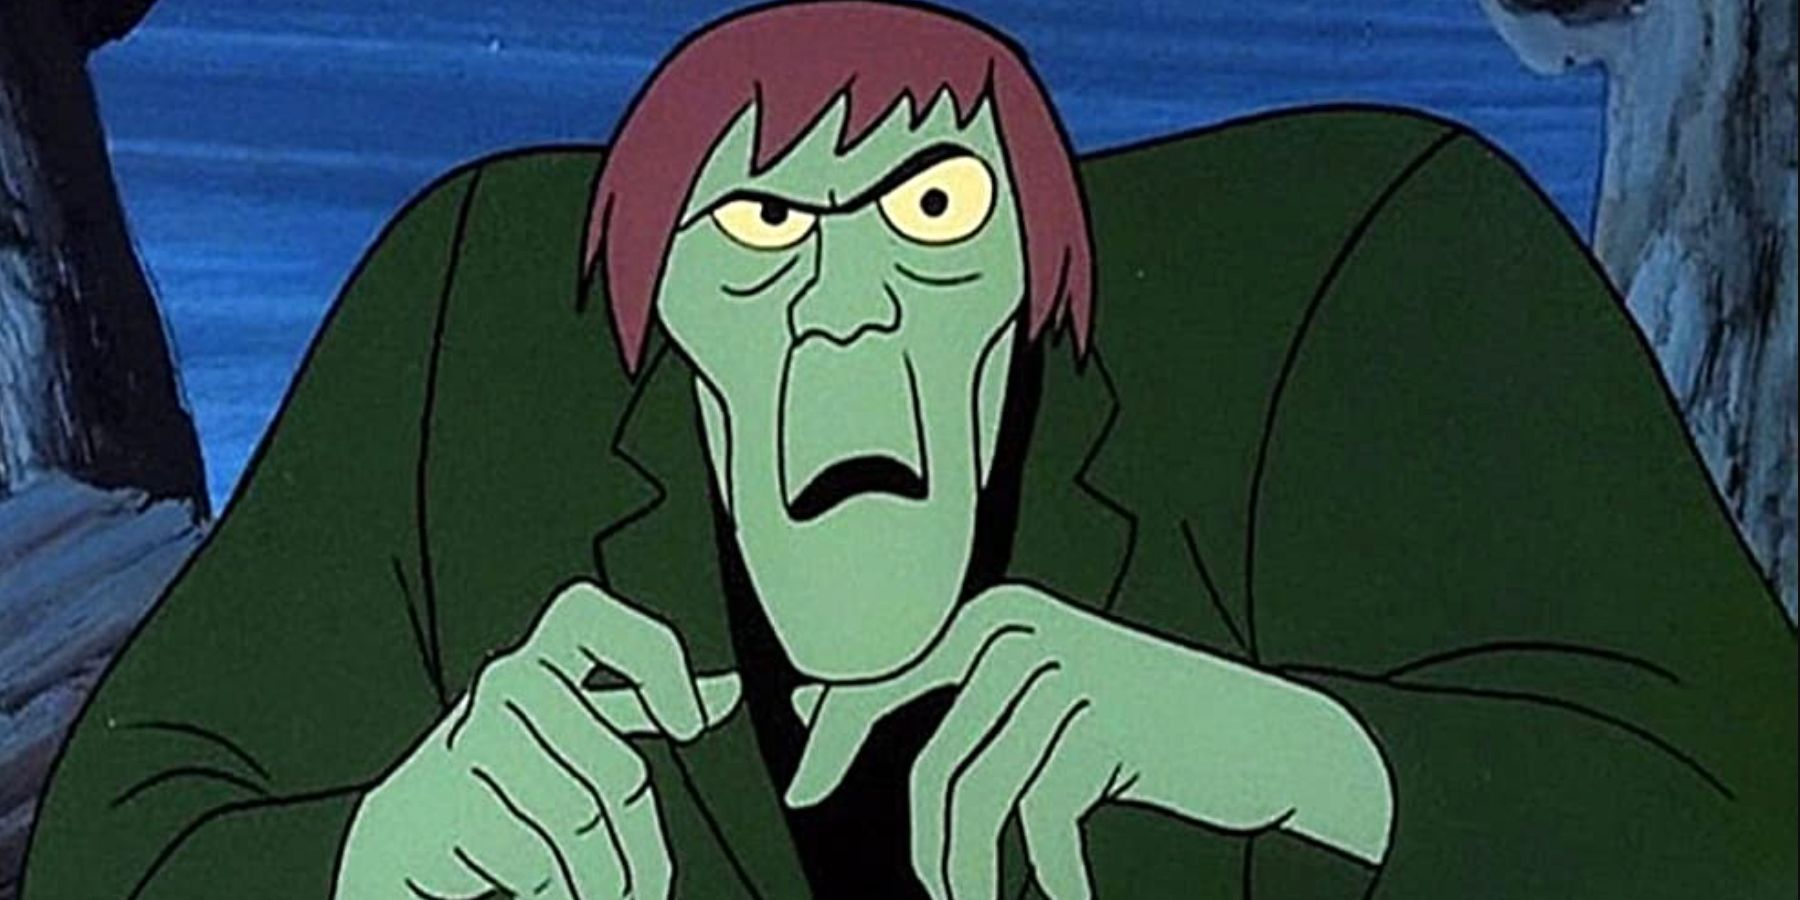 The Creeper stares directly at the camera in the original Scooby Doo series